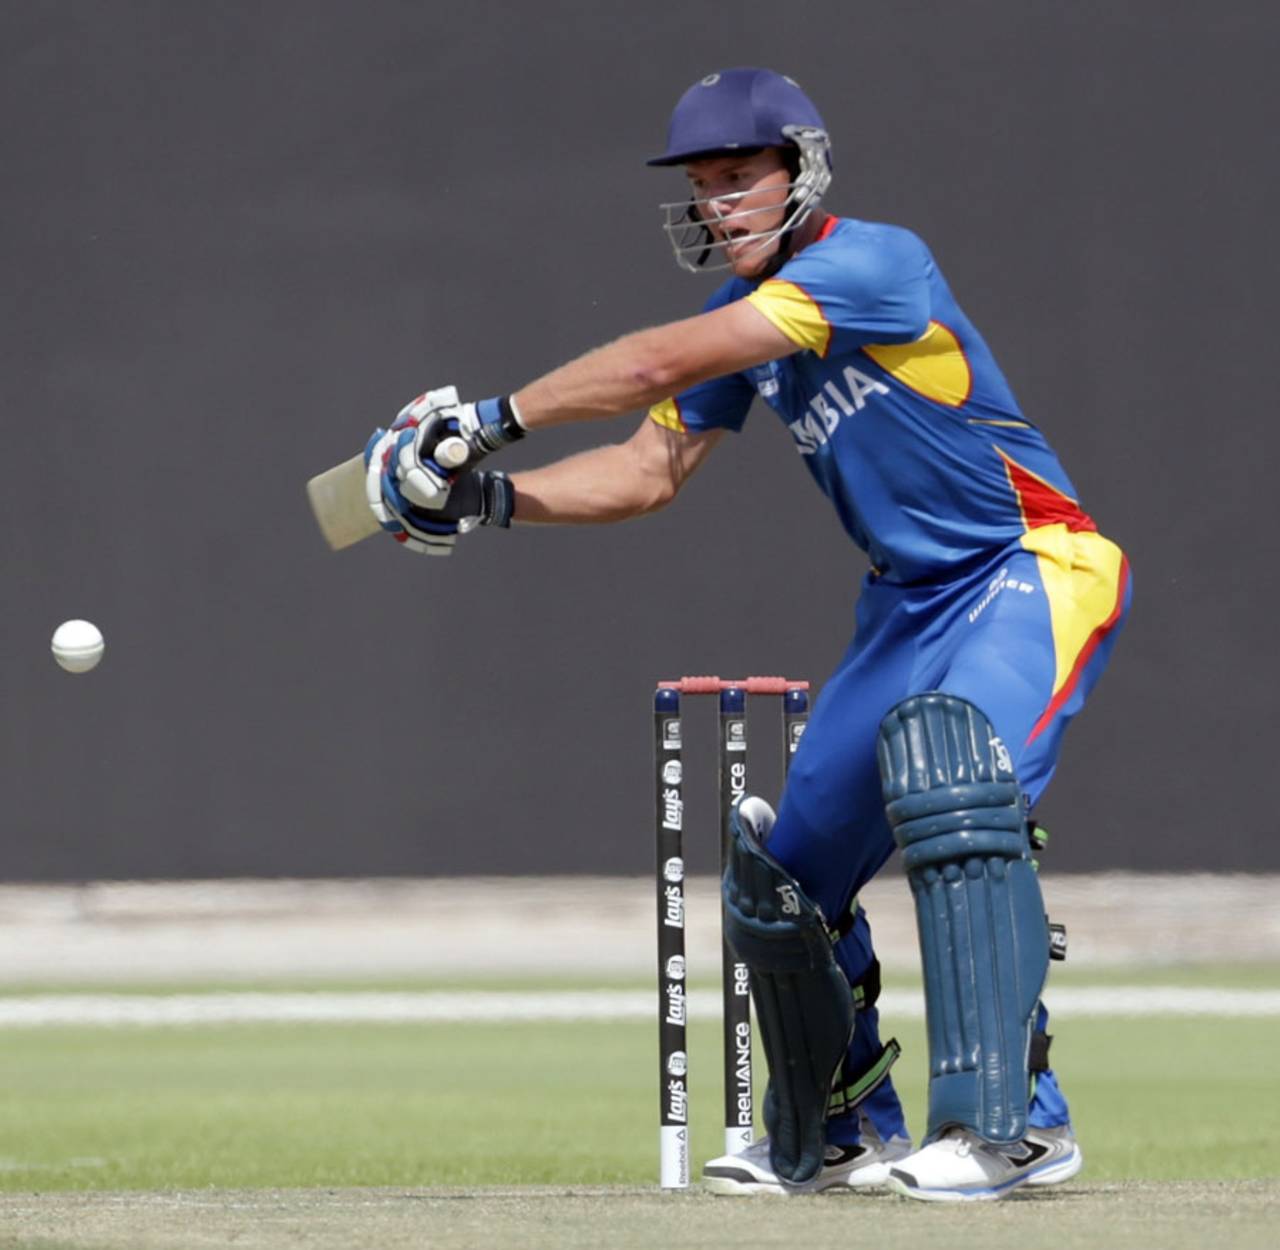 Louis van der Westhuizen opened the batting for Namibia after bowling three overs&nbsp;&nbsp;&bull;&nbsp;&nbsp;ICC/Getty